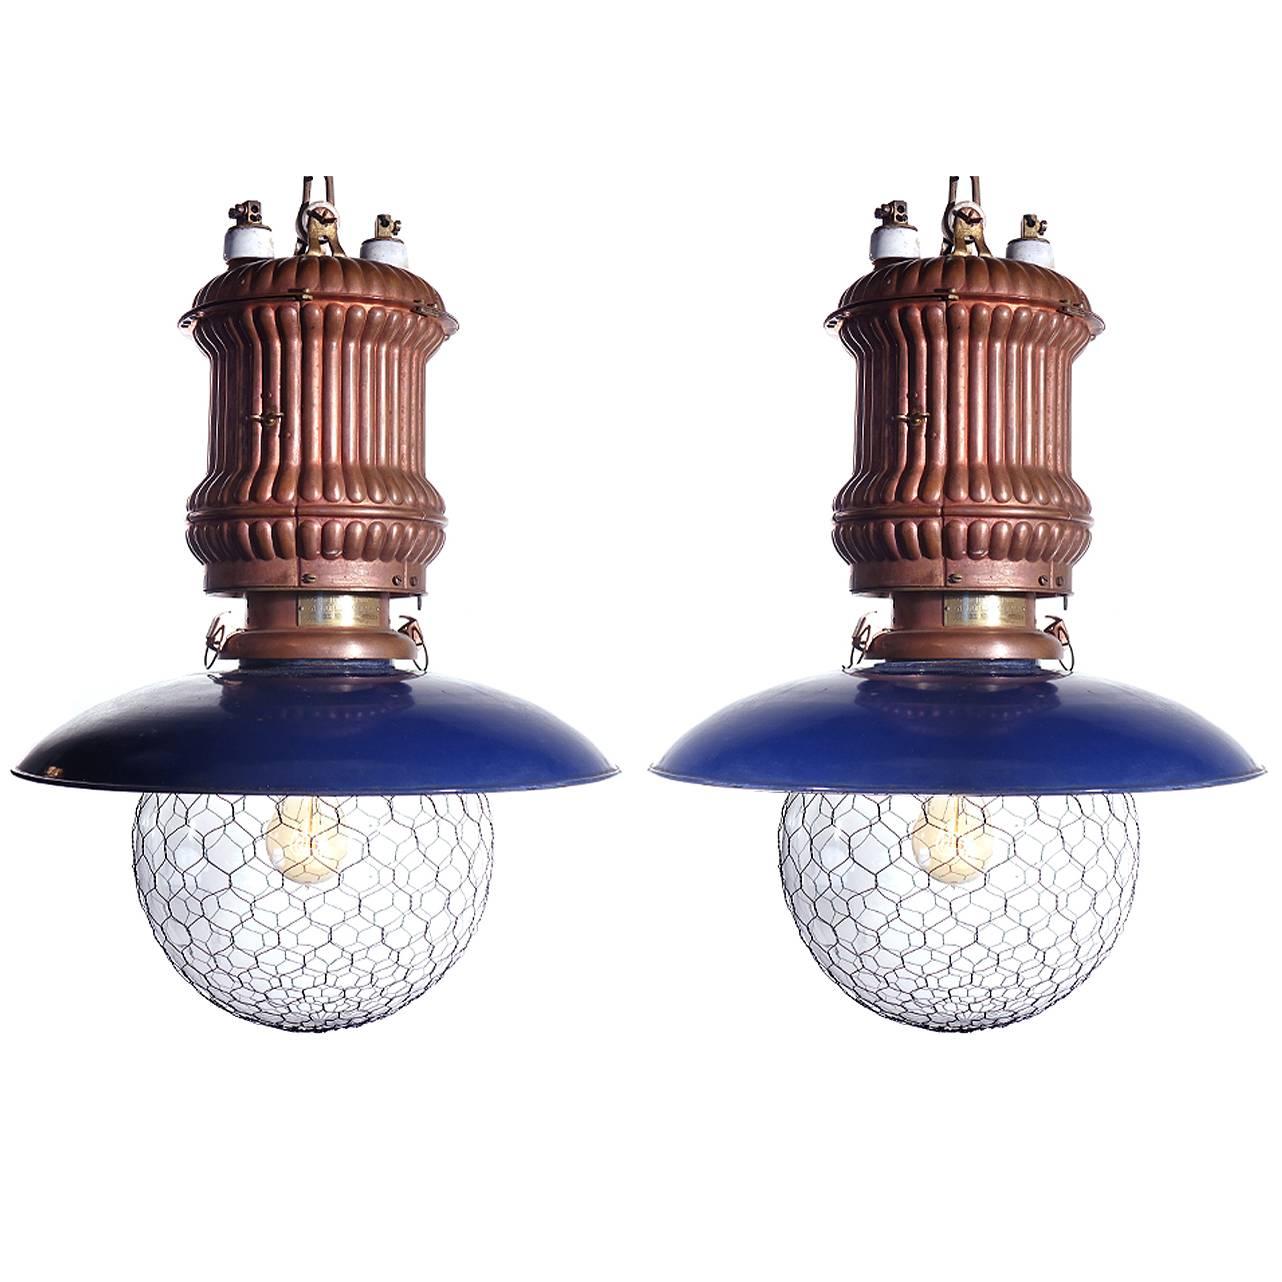 Matching Pair of Early Westinghouse Street Lamps